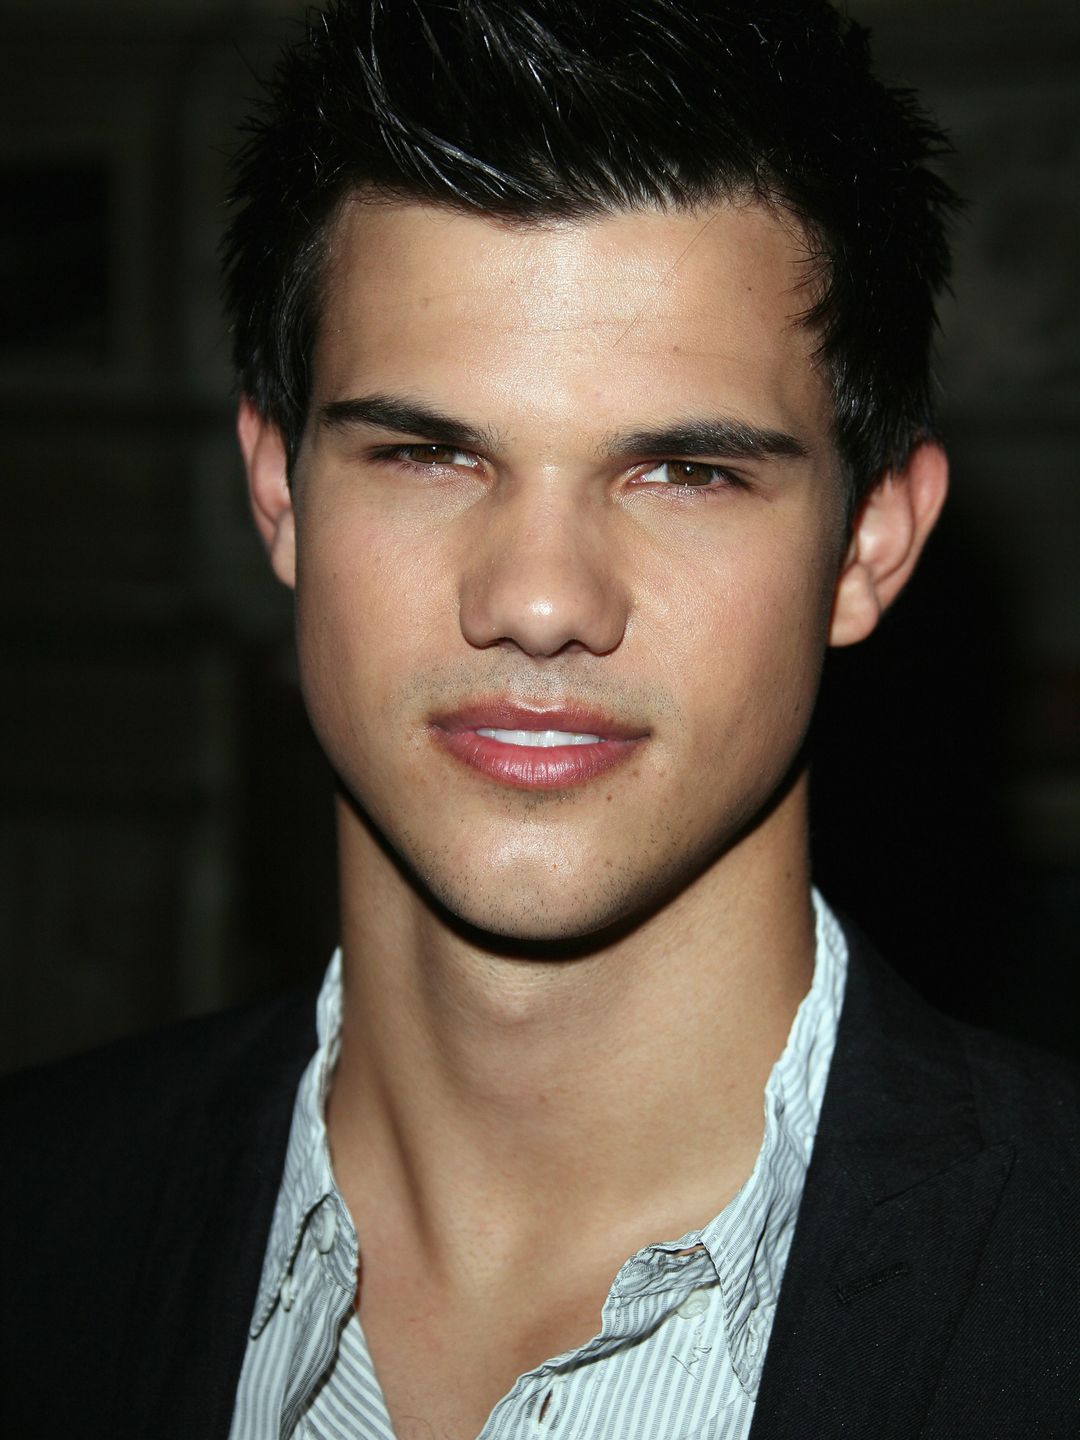 Taylor Lautner where did he study